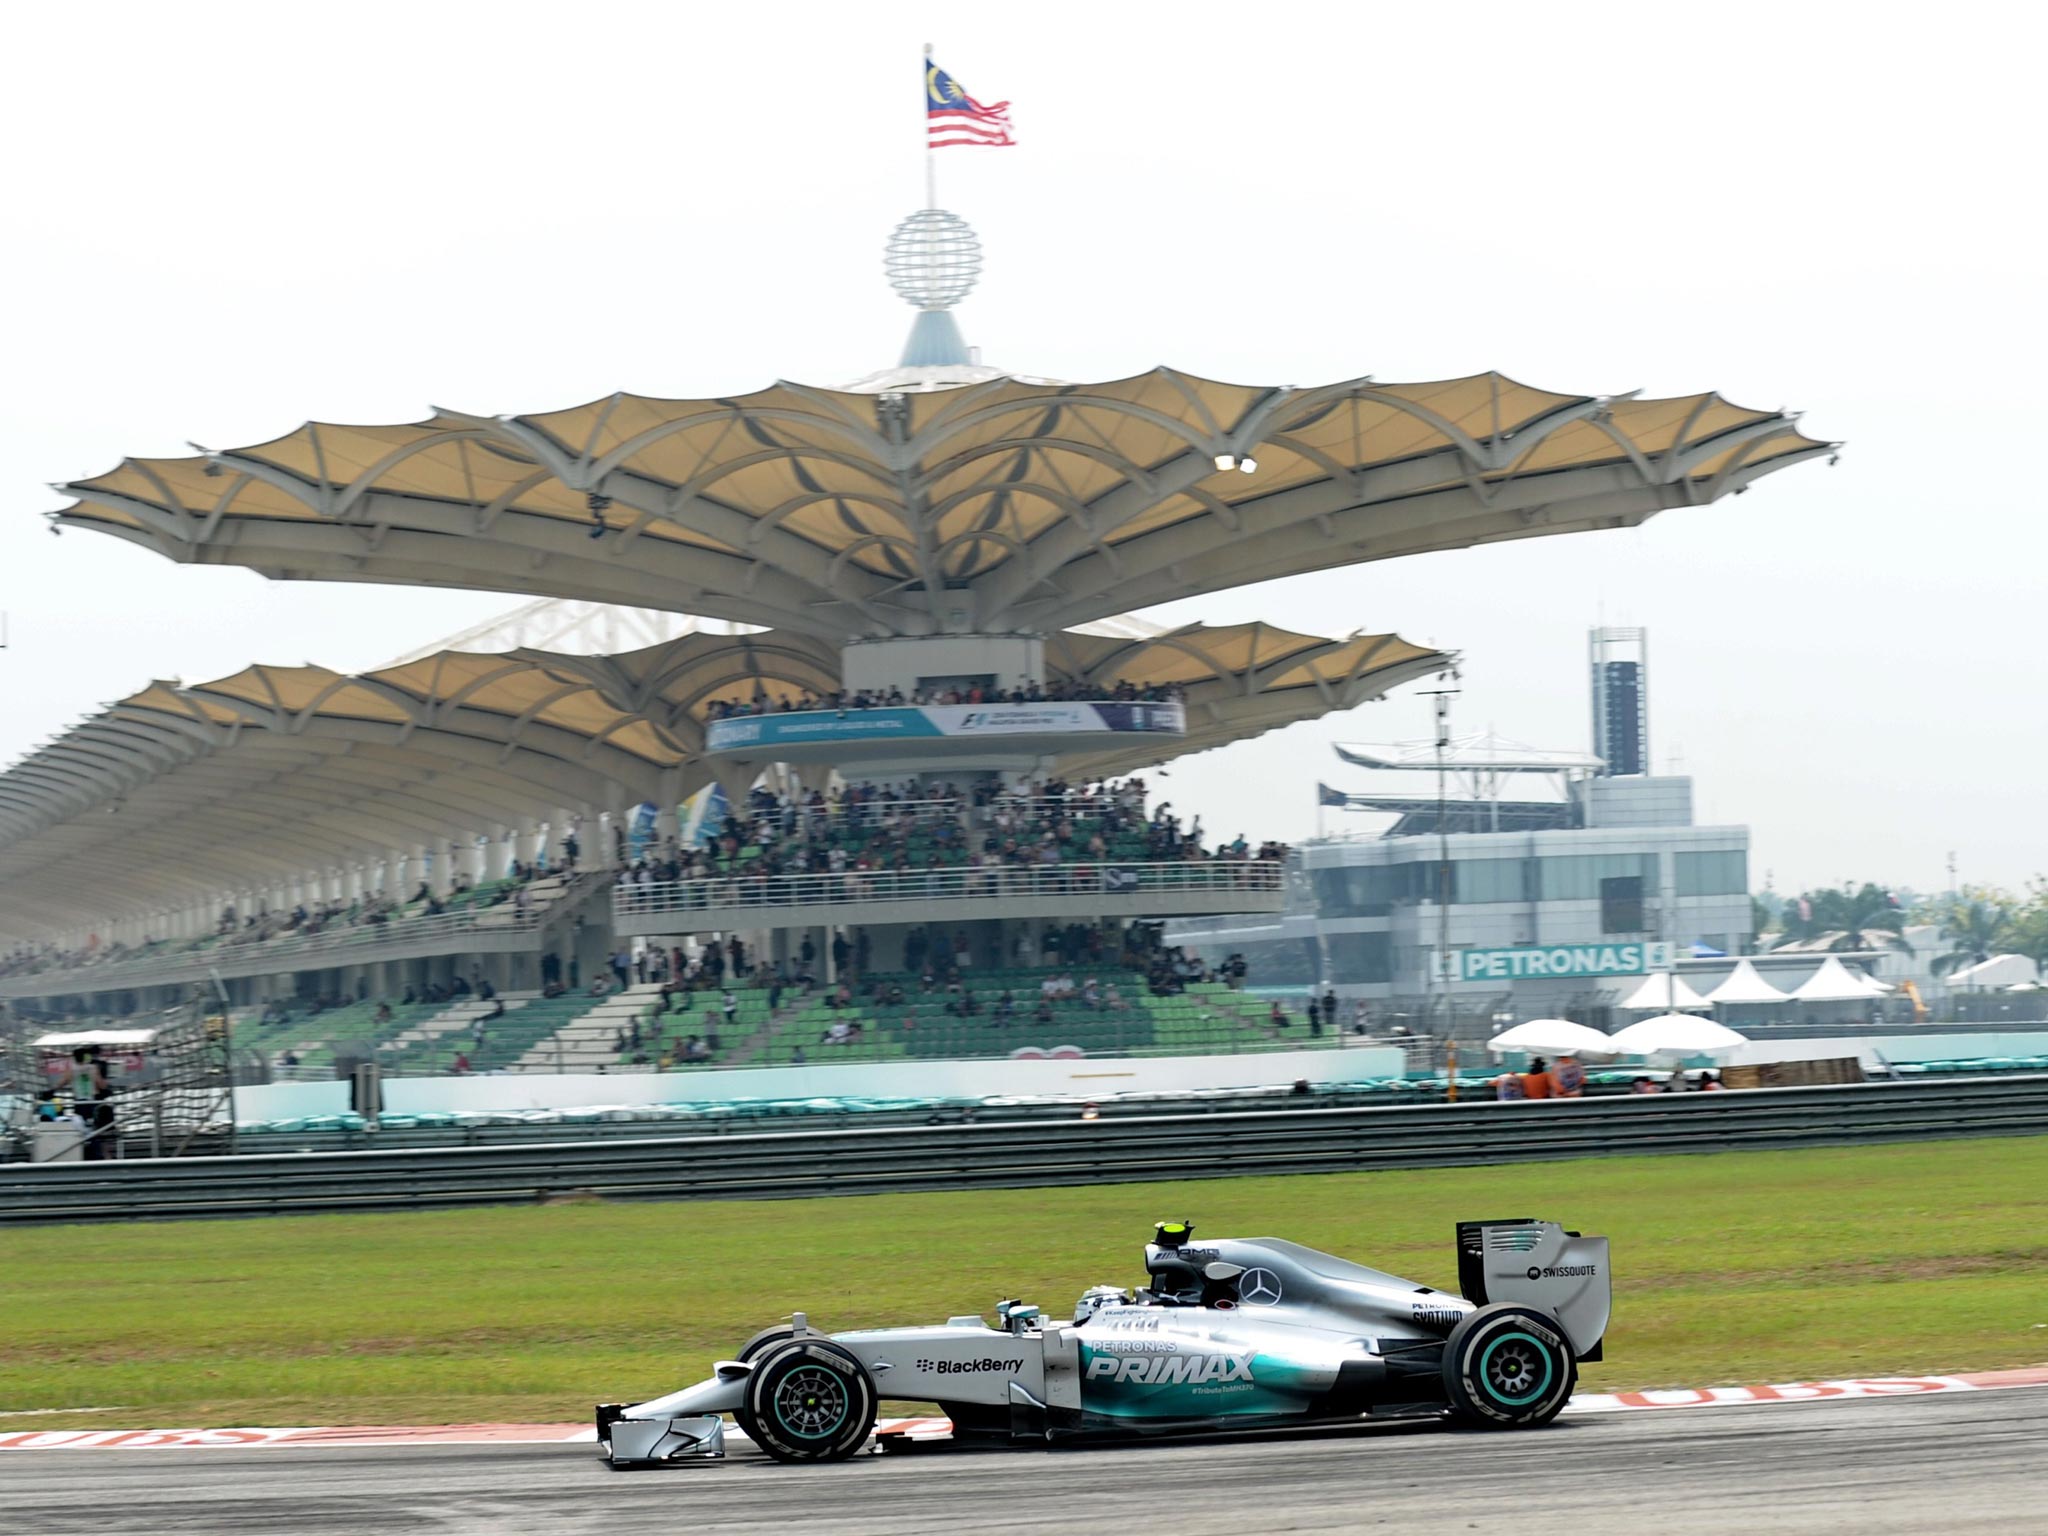 Nico Rosberg set the fastest time on Friday practice for the Malaysian Grand Prix